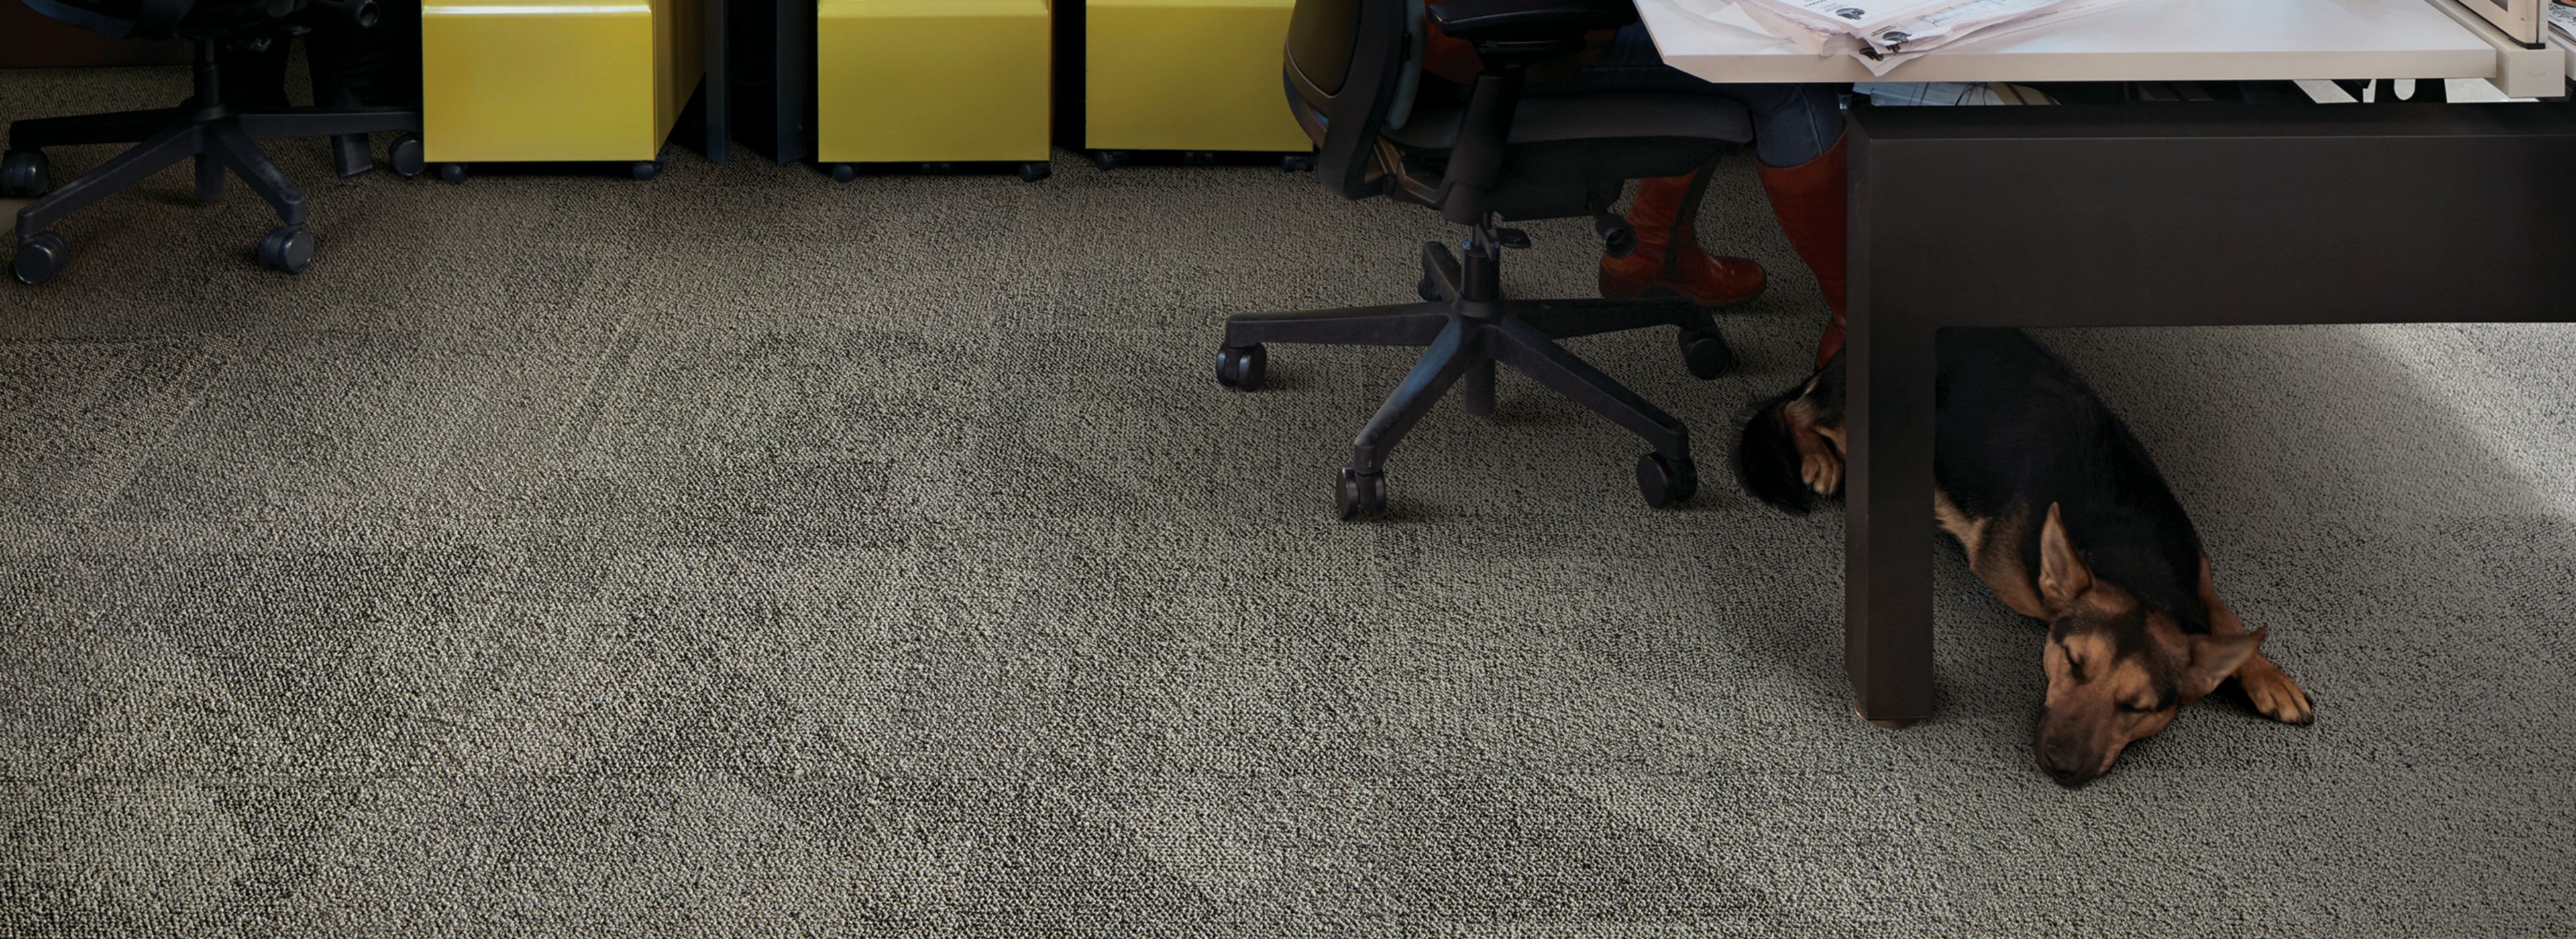 Interface Paver carpet tile and HN850 plank carpet tile in open office area with multiple people working at desk imagen número 1